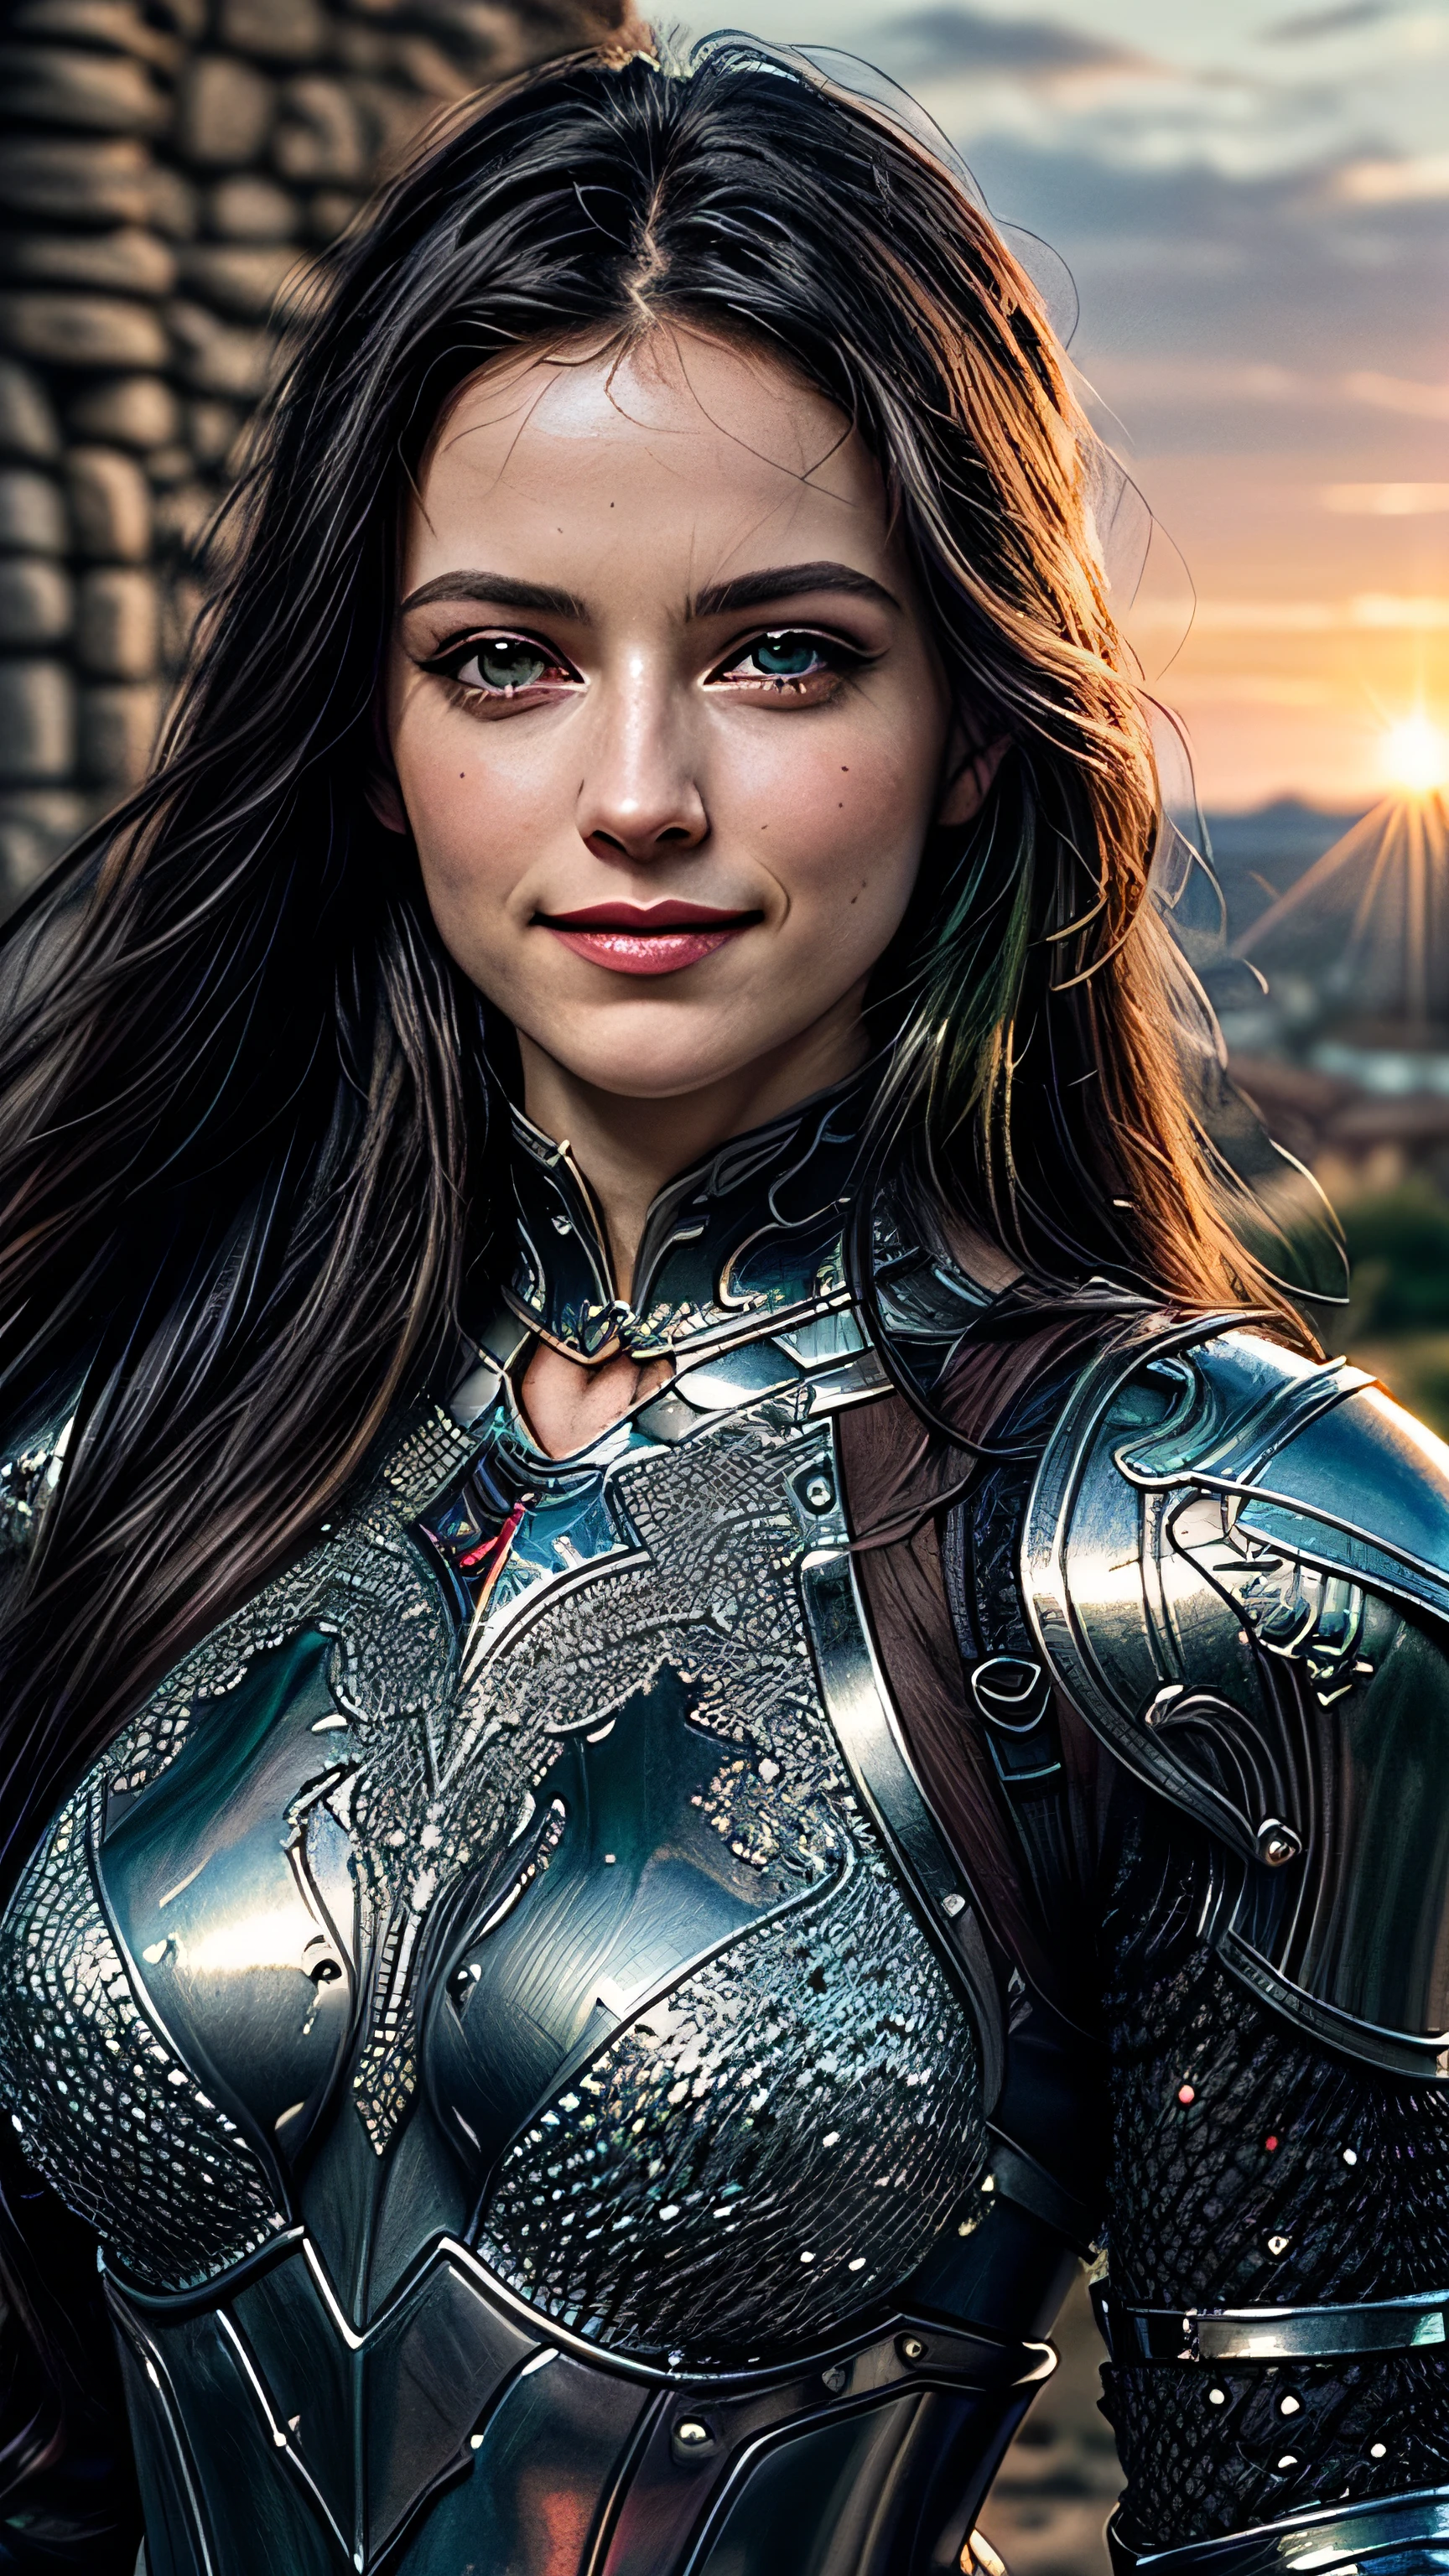 (masterpiece, photorealistic:1.4, extremely intricate:1.3), (photon mapping, radiosity, physically based rendering, ultra resolution, hyper-realistic, photorealistic:1.4, hyper-realistic, 8K), portrait of a muscular girl, ((Sumptuous armor from the late Renaissance, black chrome perfectchainmail armor:1.4, (long eyelashes), clear green eyes, smiling)), metal reflections, upper body, portrait, outdoors, intense sunlight, far away castle, professional photograph of a stunning woman, (long straight black hair, blowing, dynamic pose), sharp focus, dramatic, award winning, cinematic lighting, (film grain, bokeh, interaction, sunrise)
